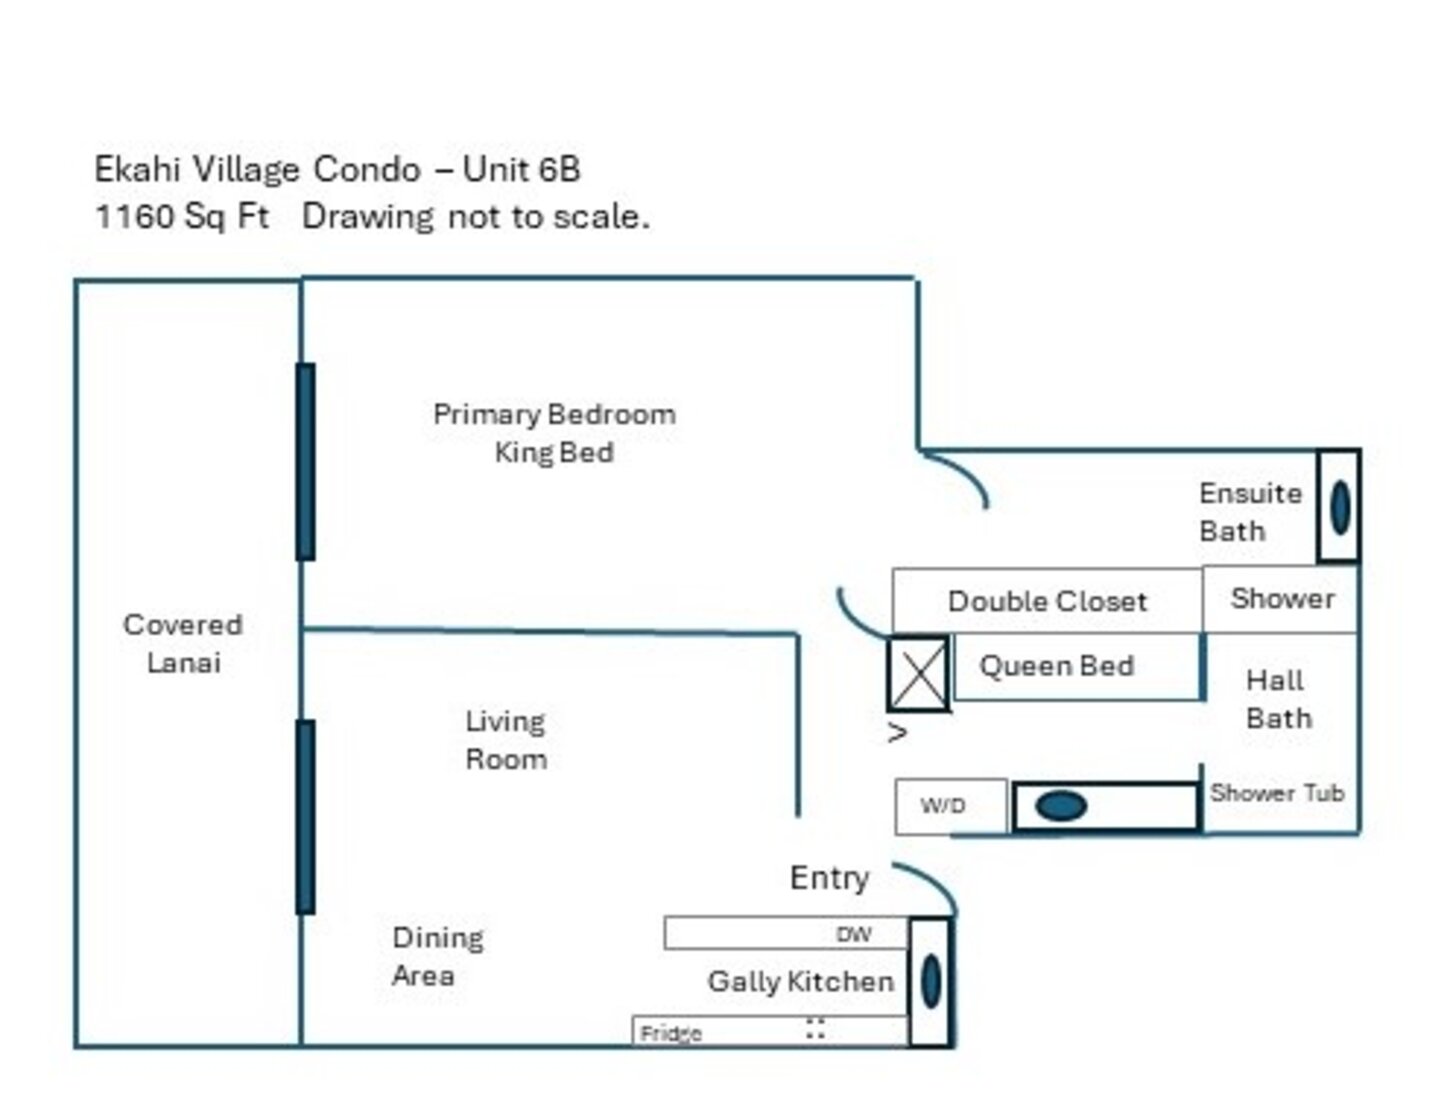 To help see if this condo fits your group, see where the king and queen bed are located.